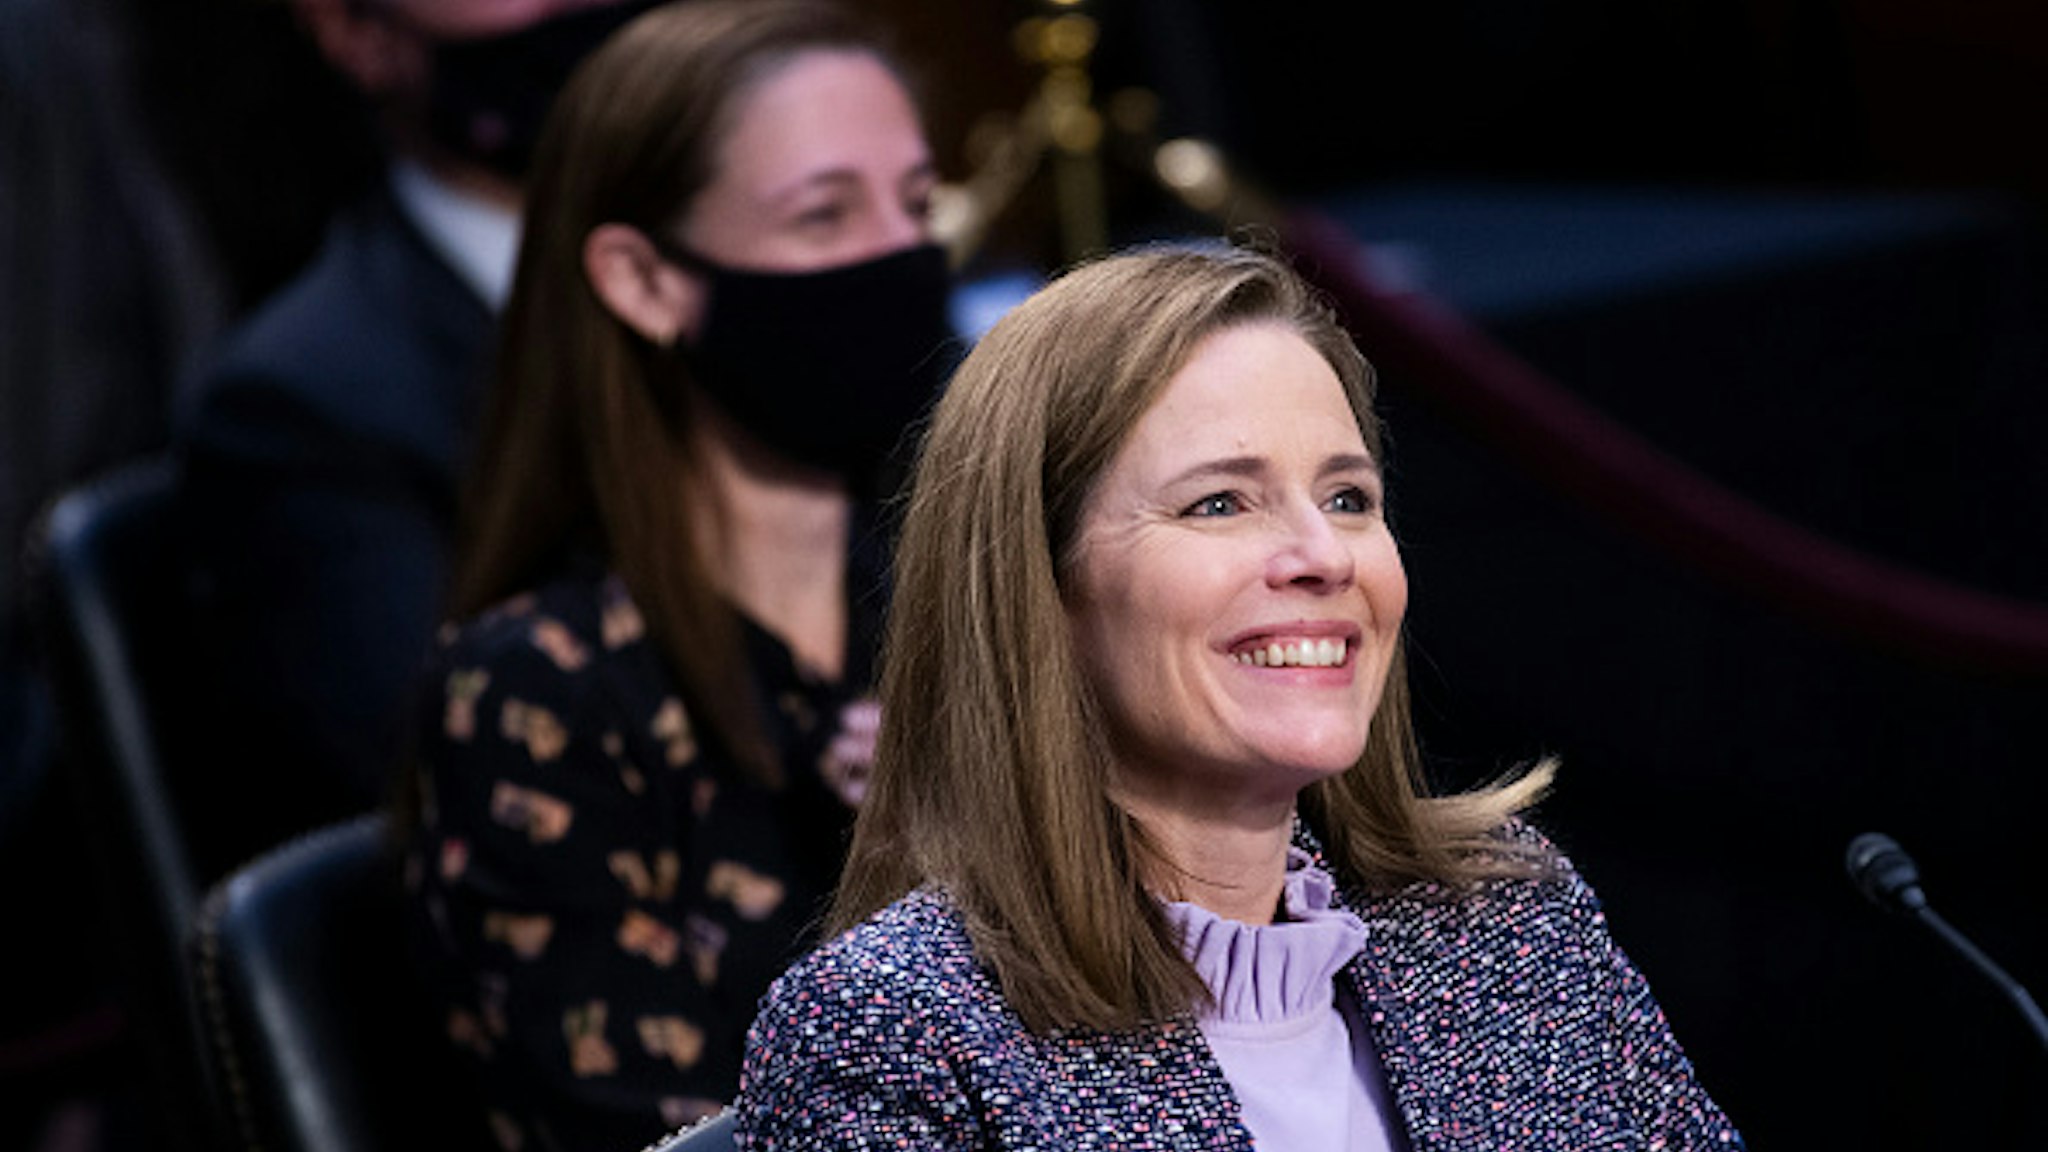 UNITED STATES - OCTOBER 14: Supreme Court justice nominee Amy Coney Barrett testifies on the third day of her Senate Judiciary Committee confirmation hearing in Hart Senate Office Building on Wednesday, October 14, 2020.